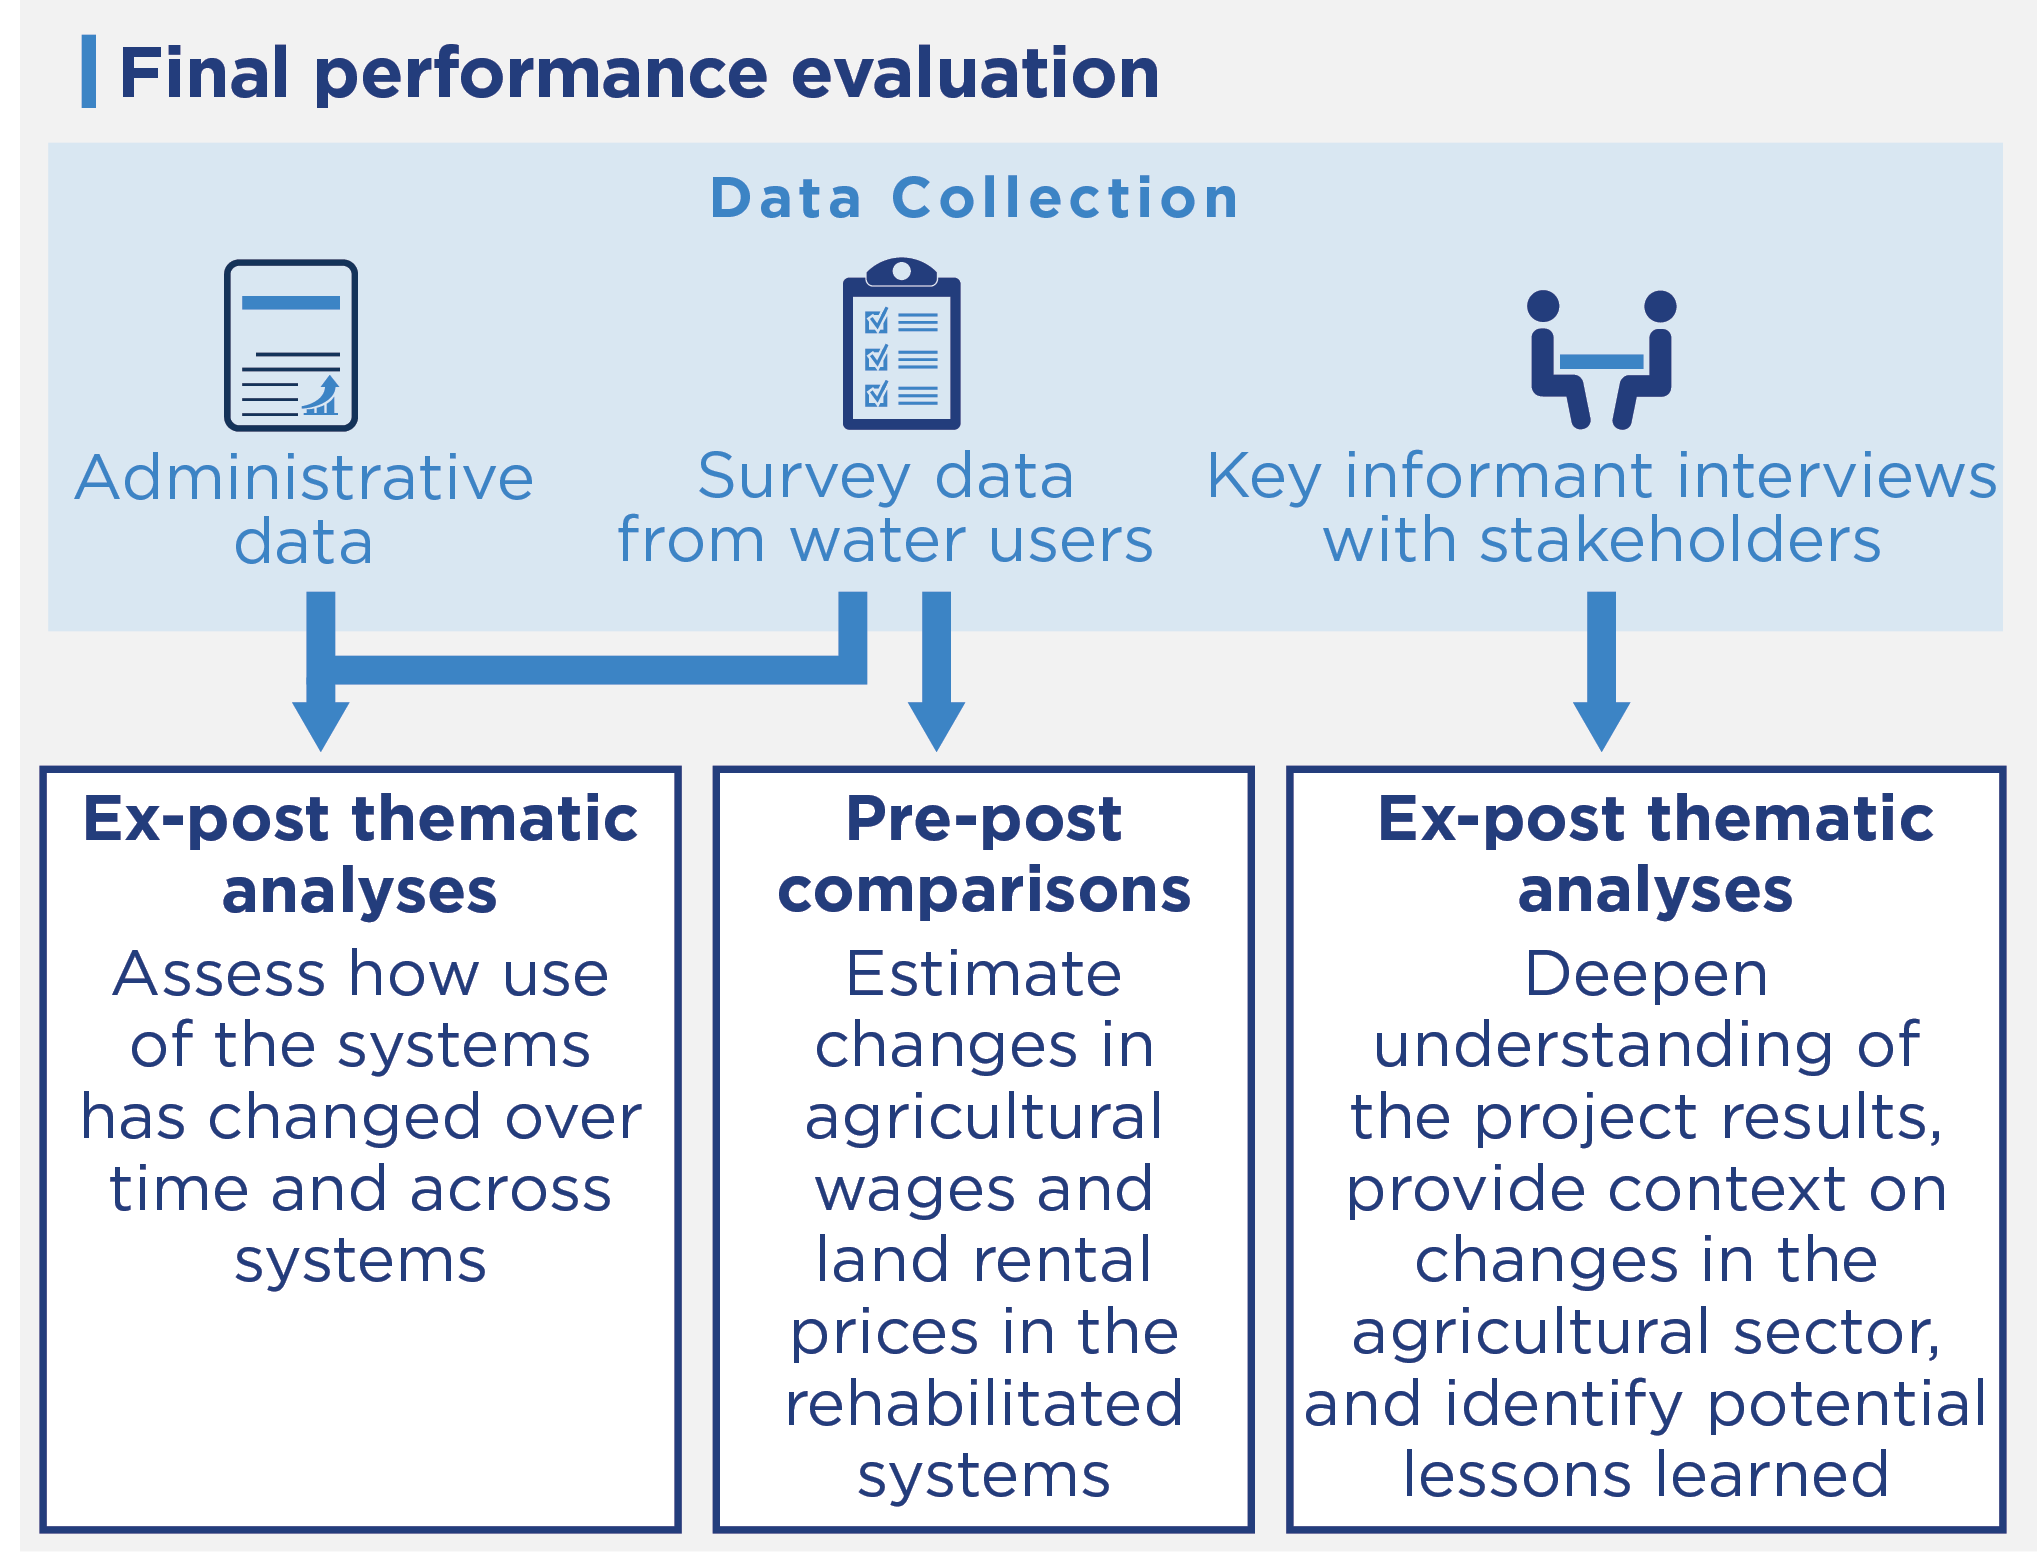 The final performance evaluation used data from administrative sources, survey data from water users and key informant interviews with stakeholders.